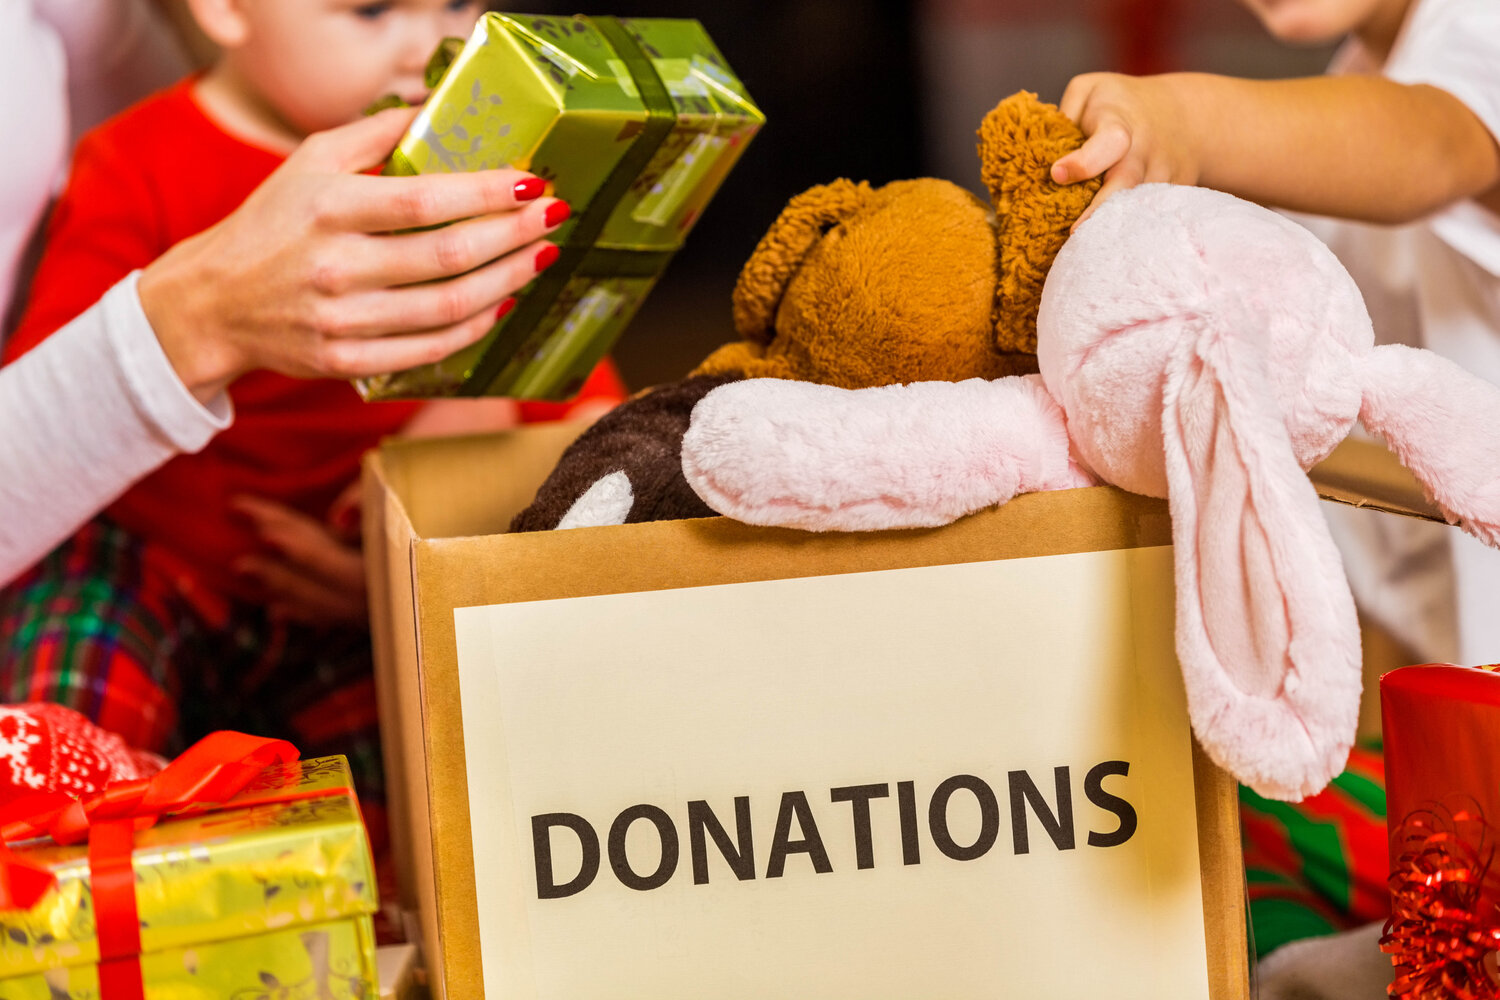 Scottsdale Fire is now accepting unwrapped toys and gift cards through Dec. 20 at SFD fire stations and headquarters.